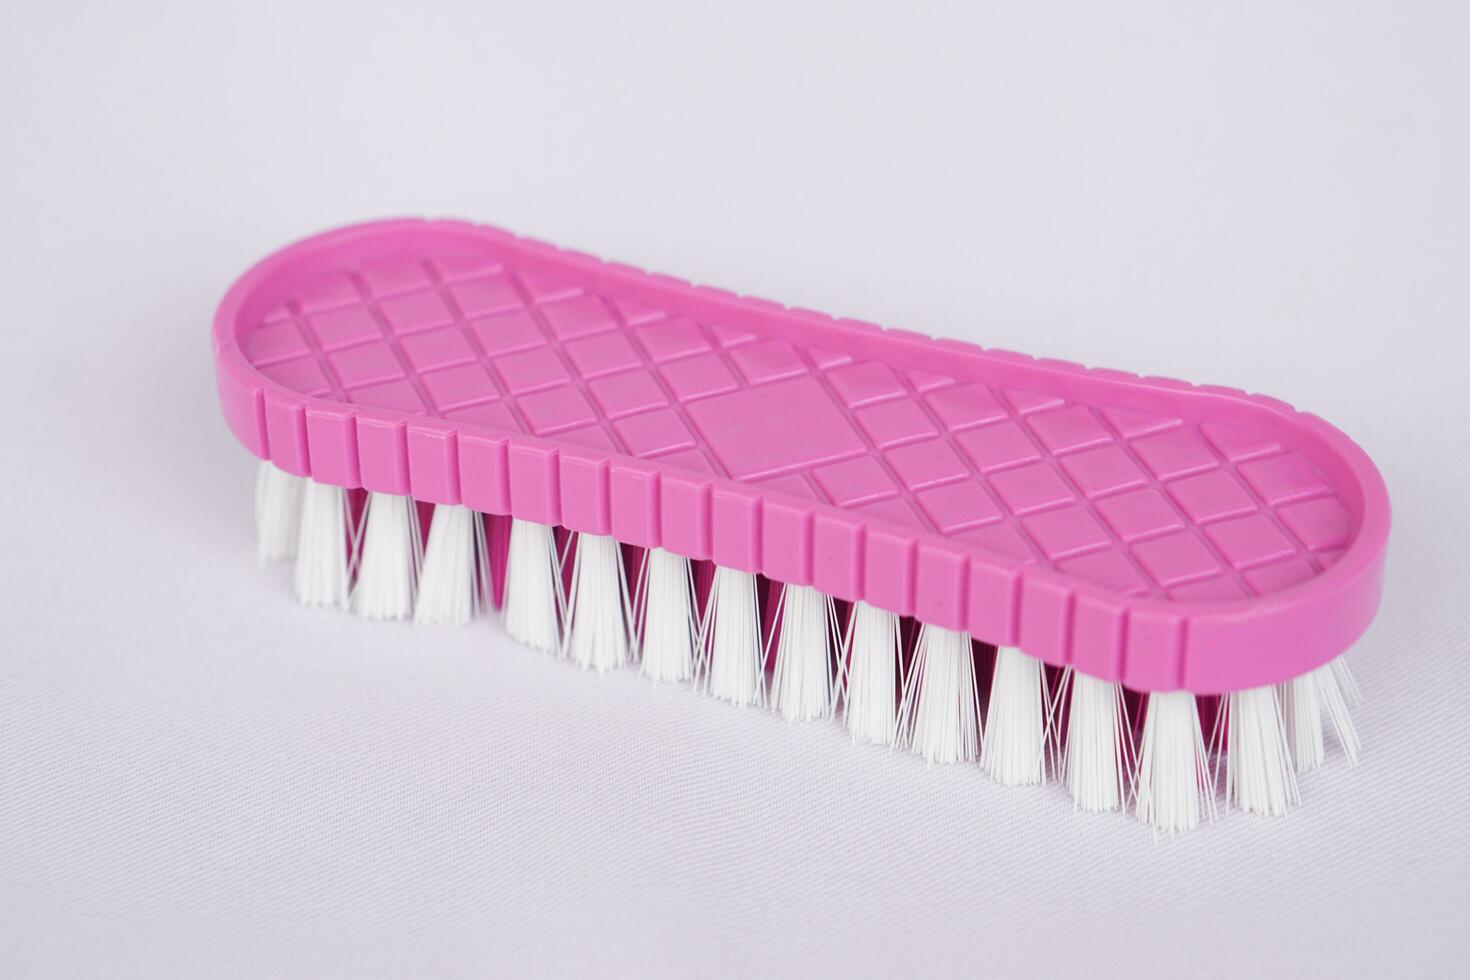 Pink brush made of plastic and nylon for washing cloth or cleaning floor on white background. Concept, equipment for washing, scrubbing and cleaning dirty cloth, carpet or surface. Daily chores tool. photo